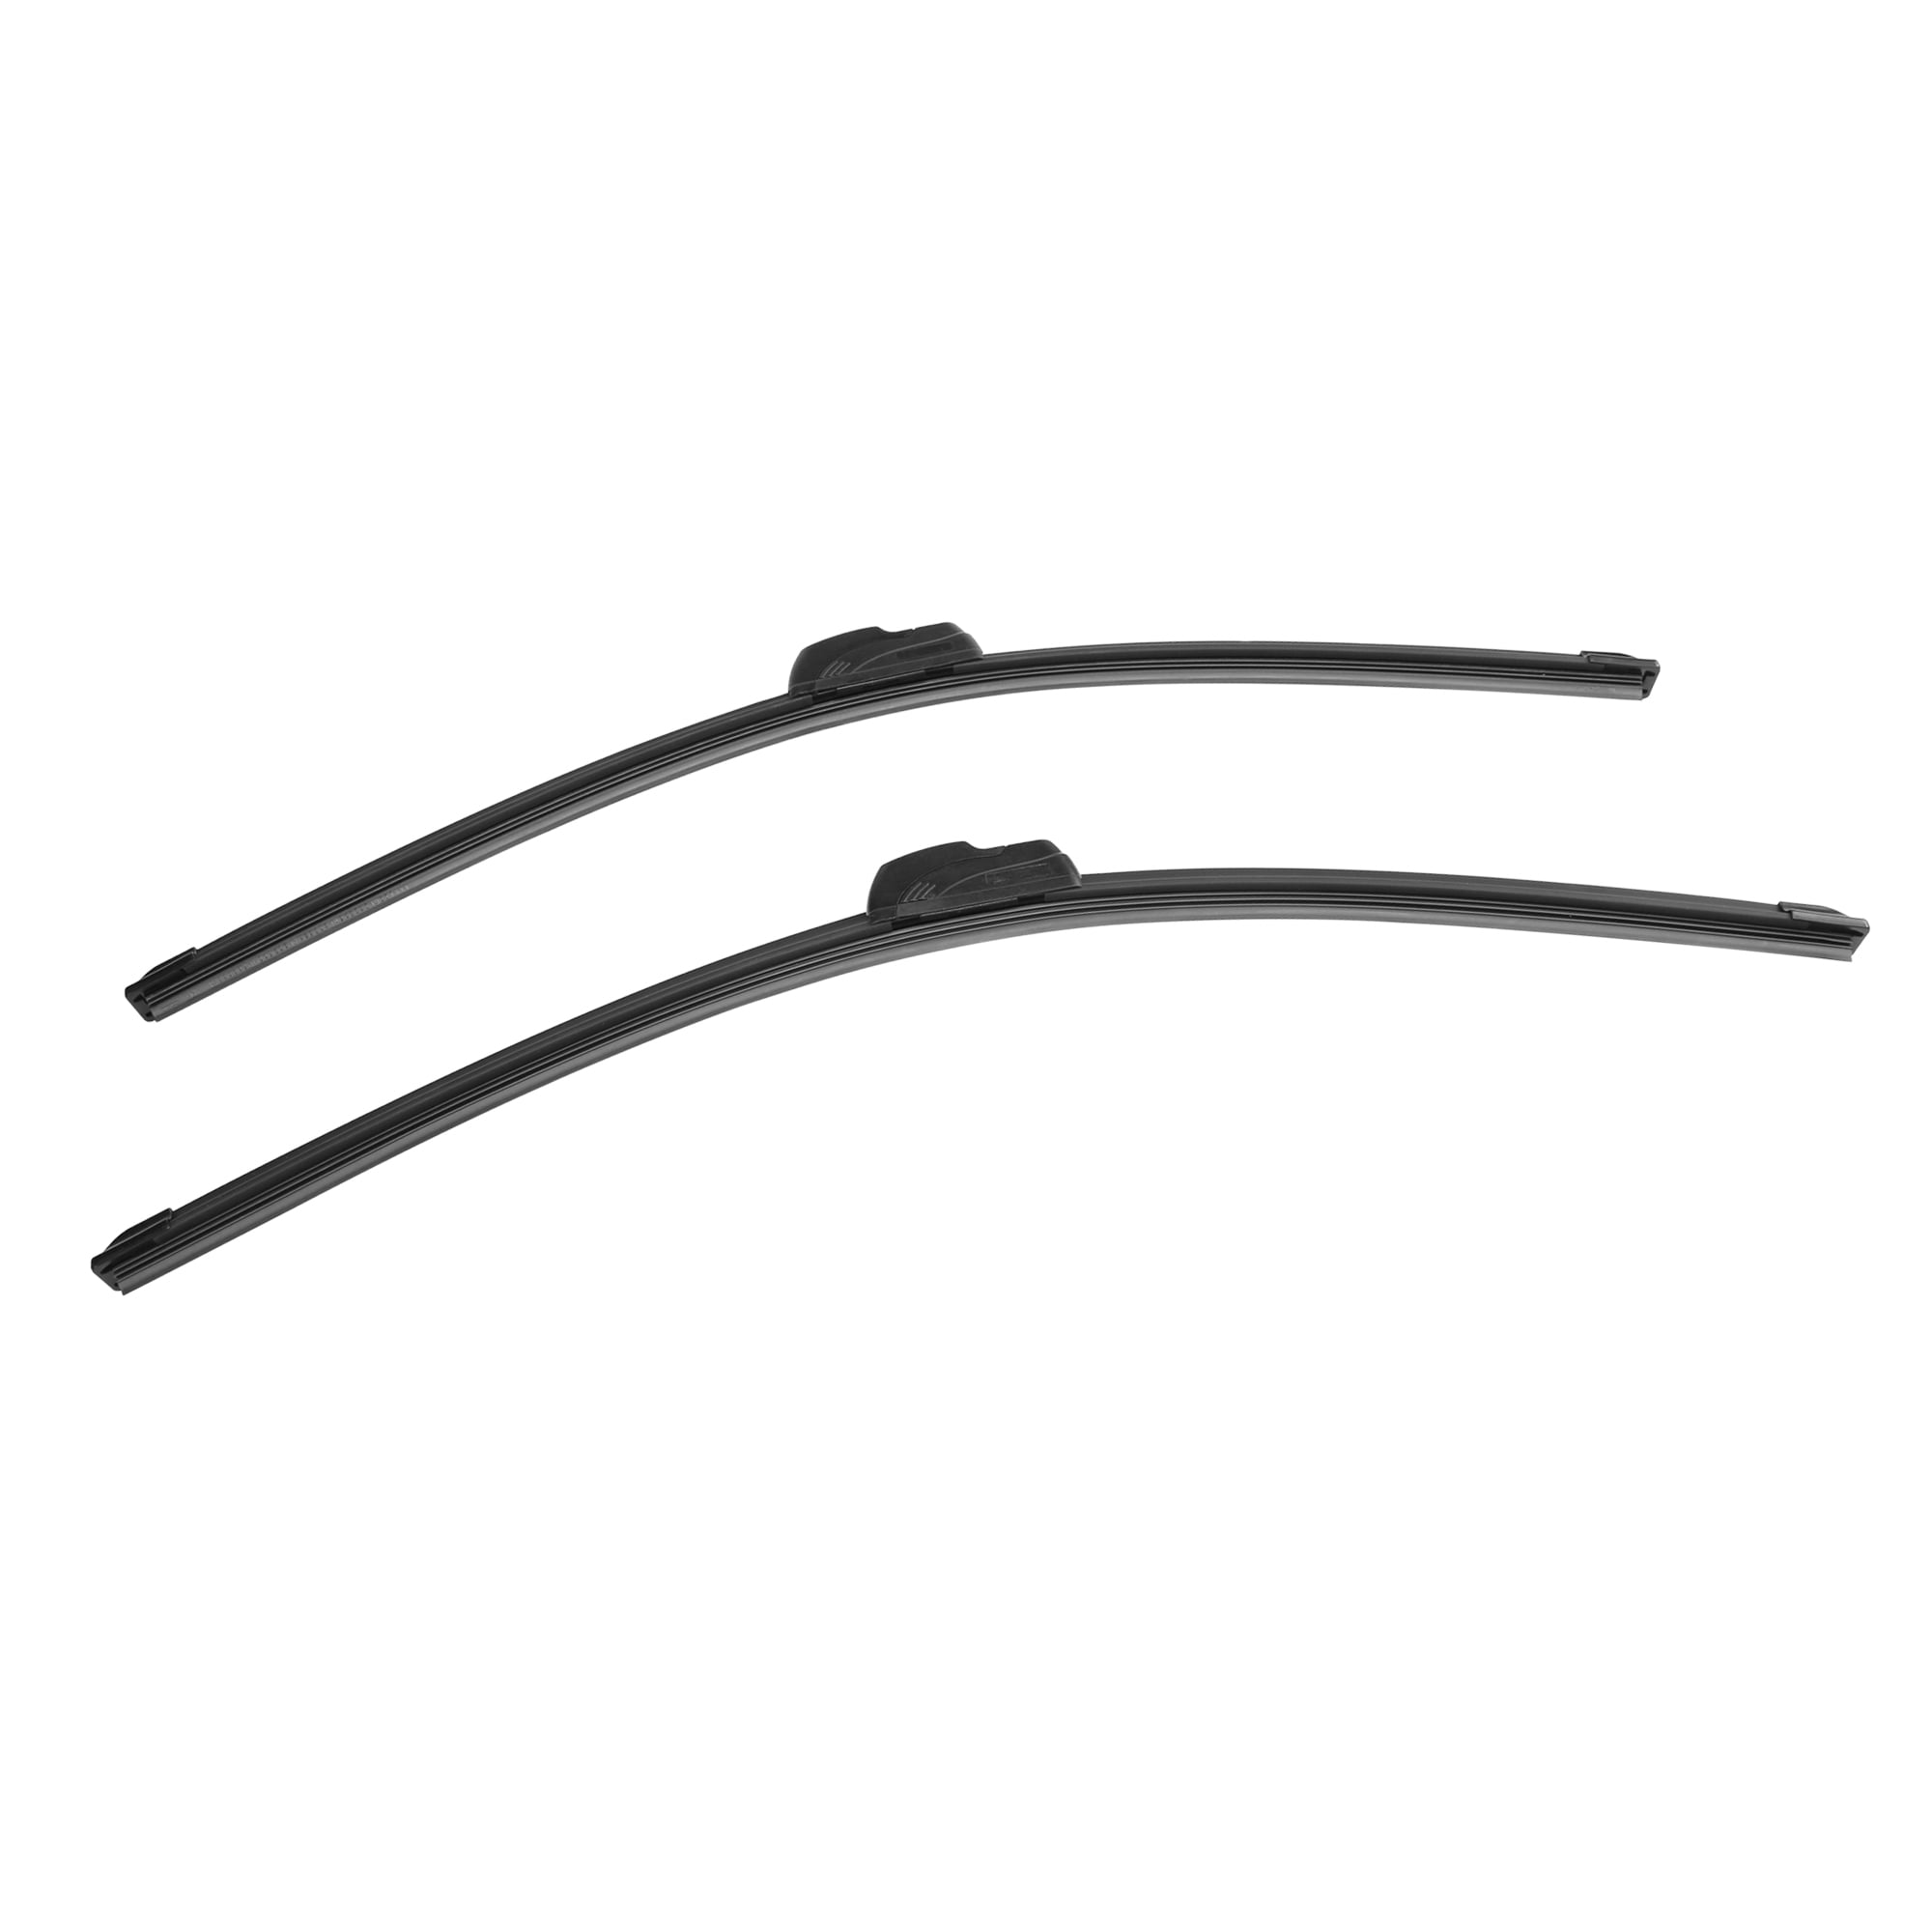 Front Windshield Wiper Blades Fit for 2011-2016 Dodge Durango 22" 21" - Walmart.com - Walmart.com 2016 Dodge Durango Rear Wiper Blade Size